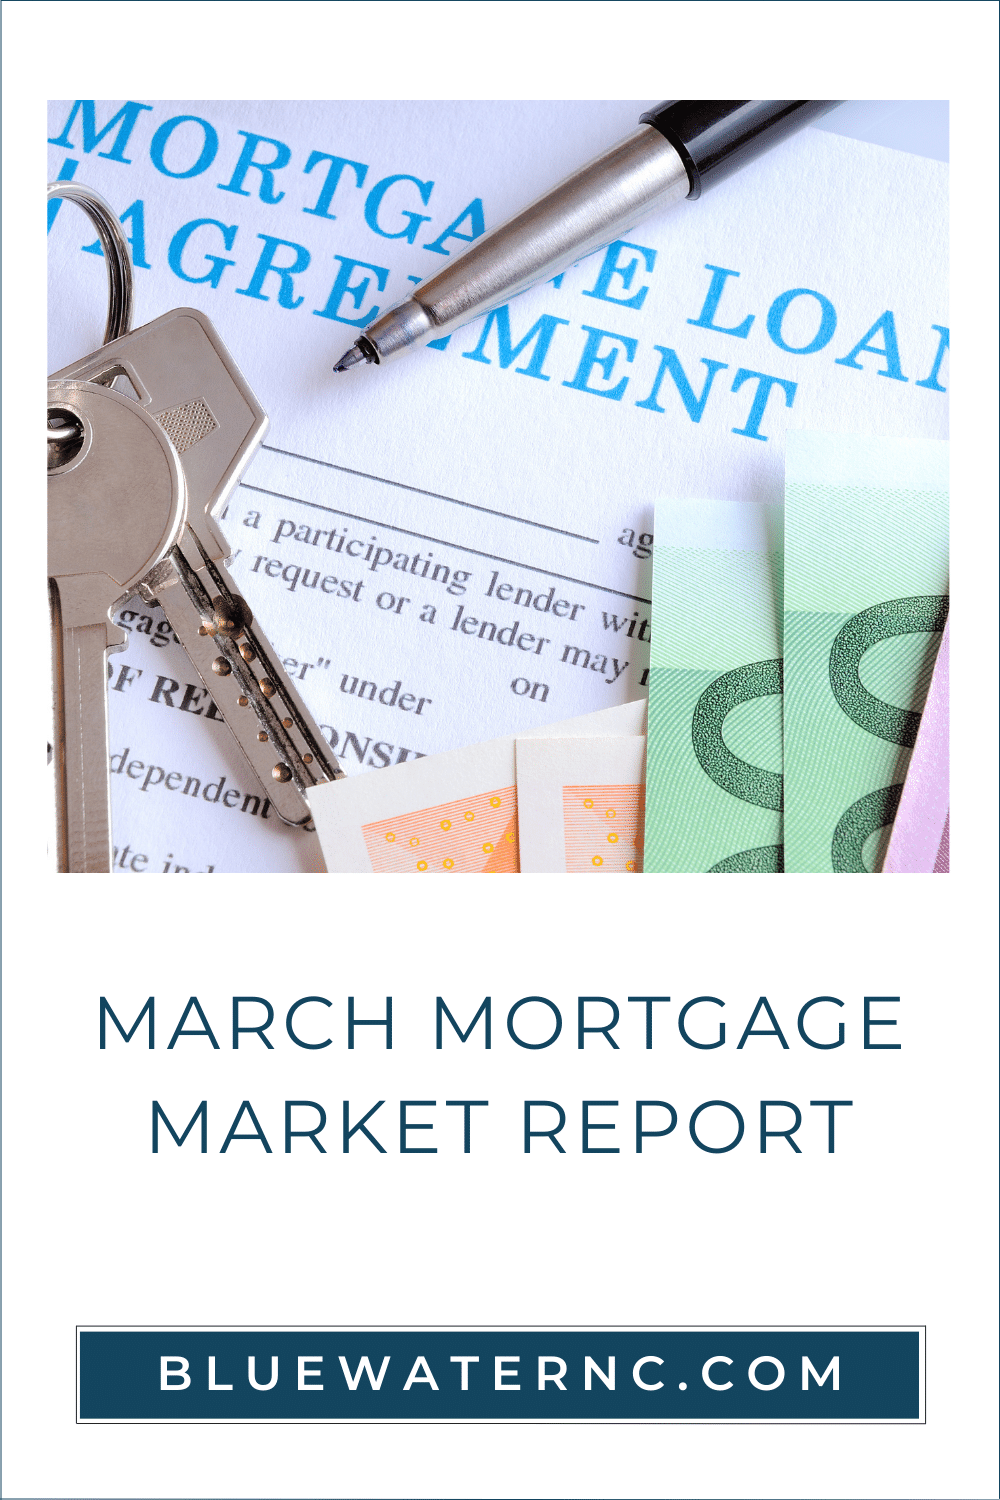 Learn about mortgages with our March Mortgage Market Report